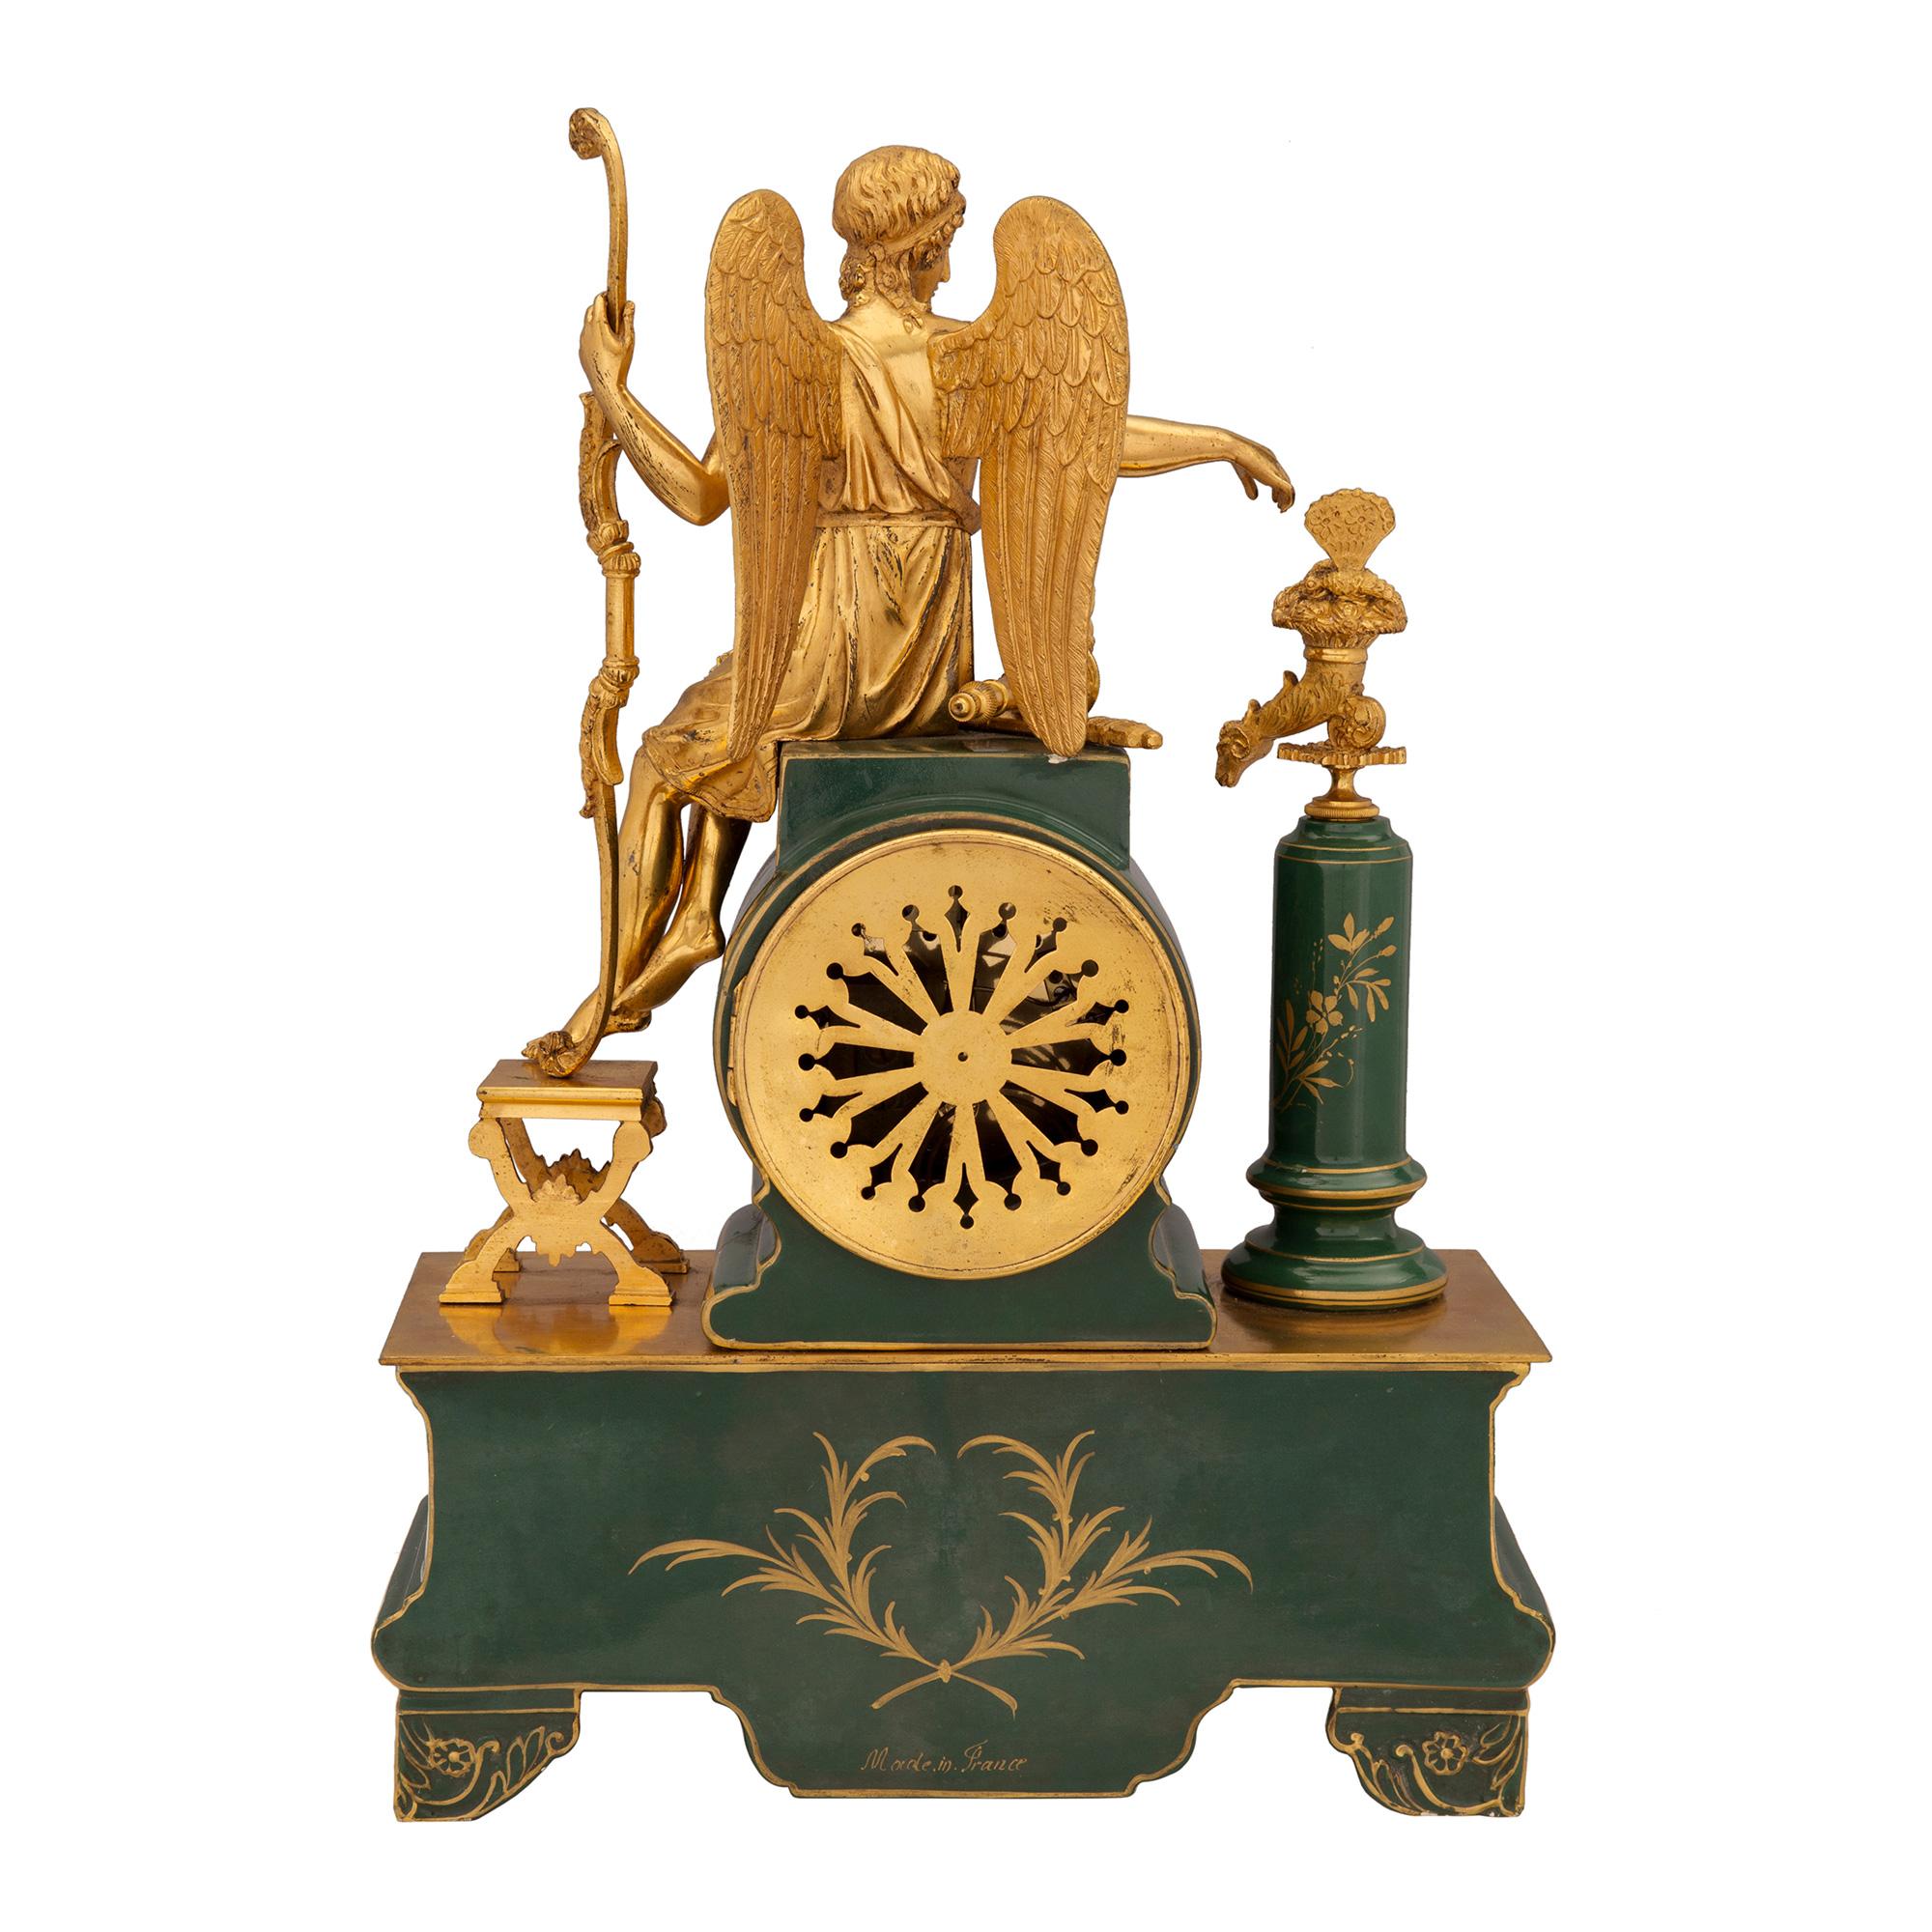 Neoclassical French 19th Century Neo-Classical Style Porcelain and Ormolu Clock For Sale